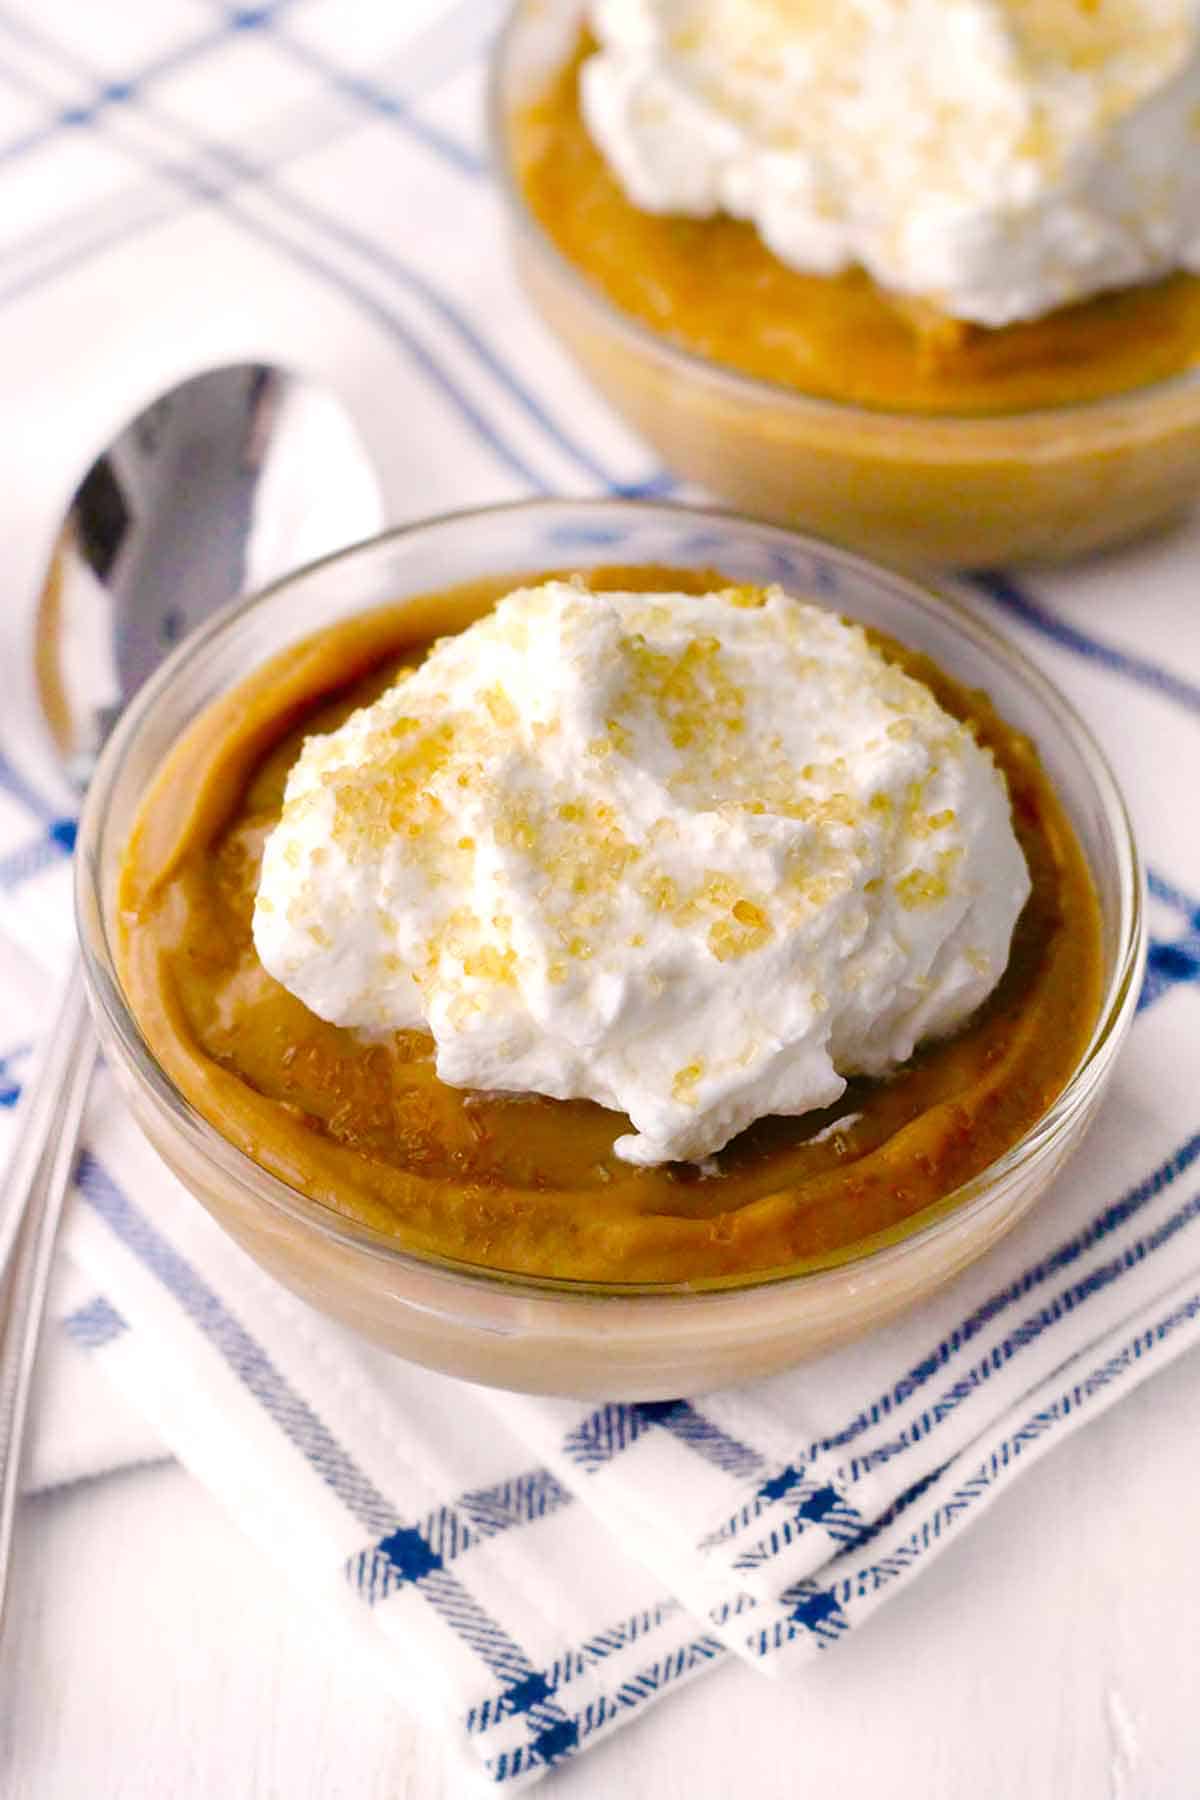 Close up photo of a bowl of butterscotch pudding with whipped cream and sugar on top.